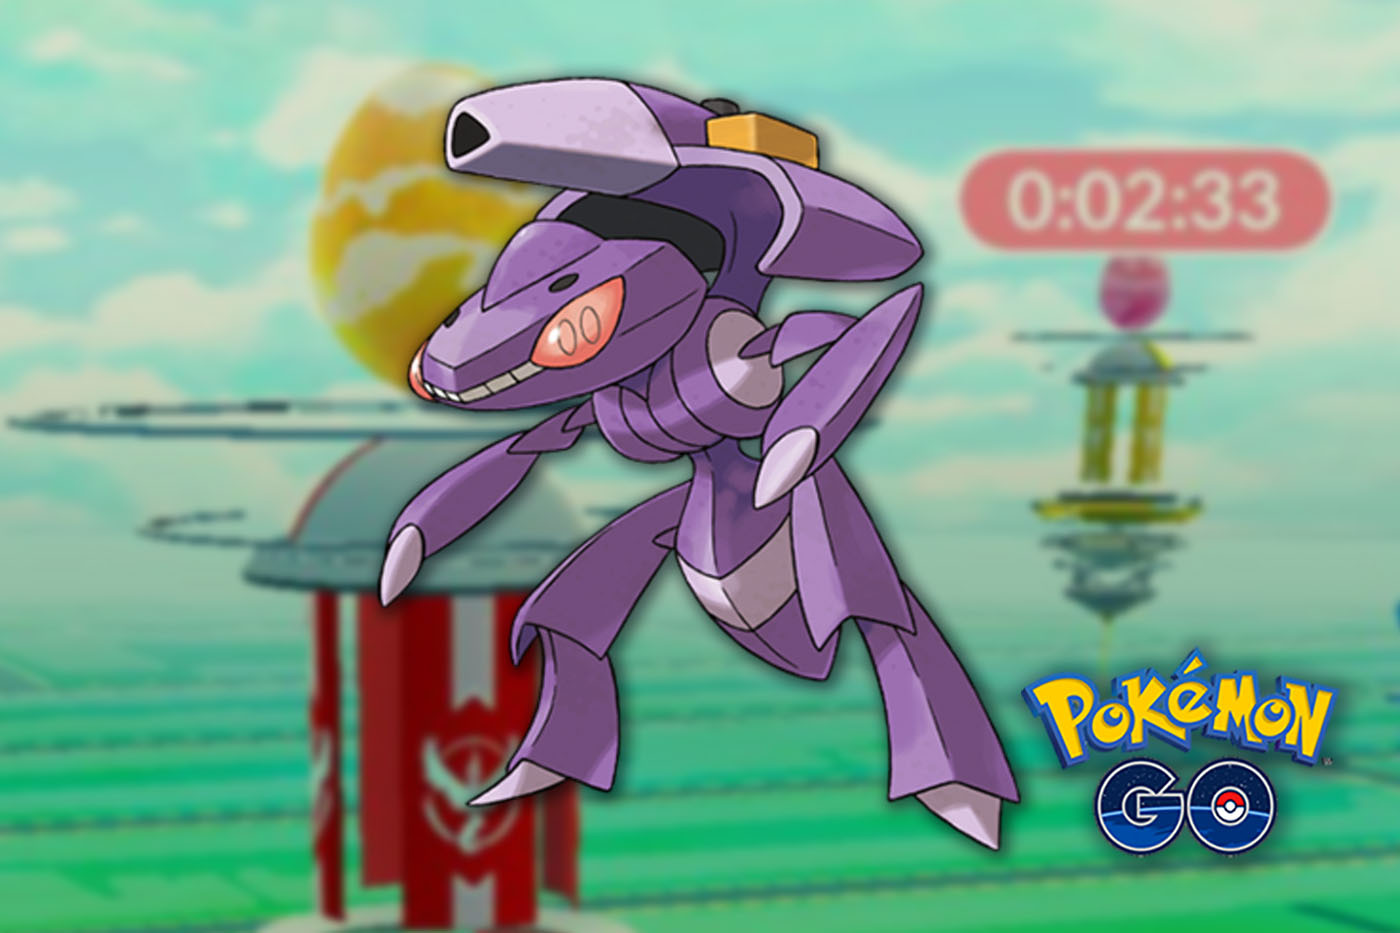 Pokemon Go Genesect counters: How to get a shiny Genesect